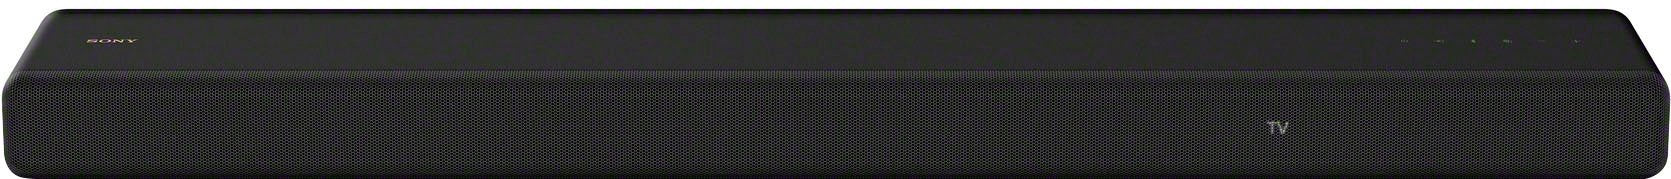 Sony HT-A3000 3.1ch Dolby Atmos Soundbar Surround Sound Home Theater w/DTS:X (Certified Refurbished)